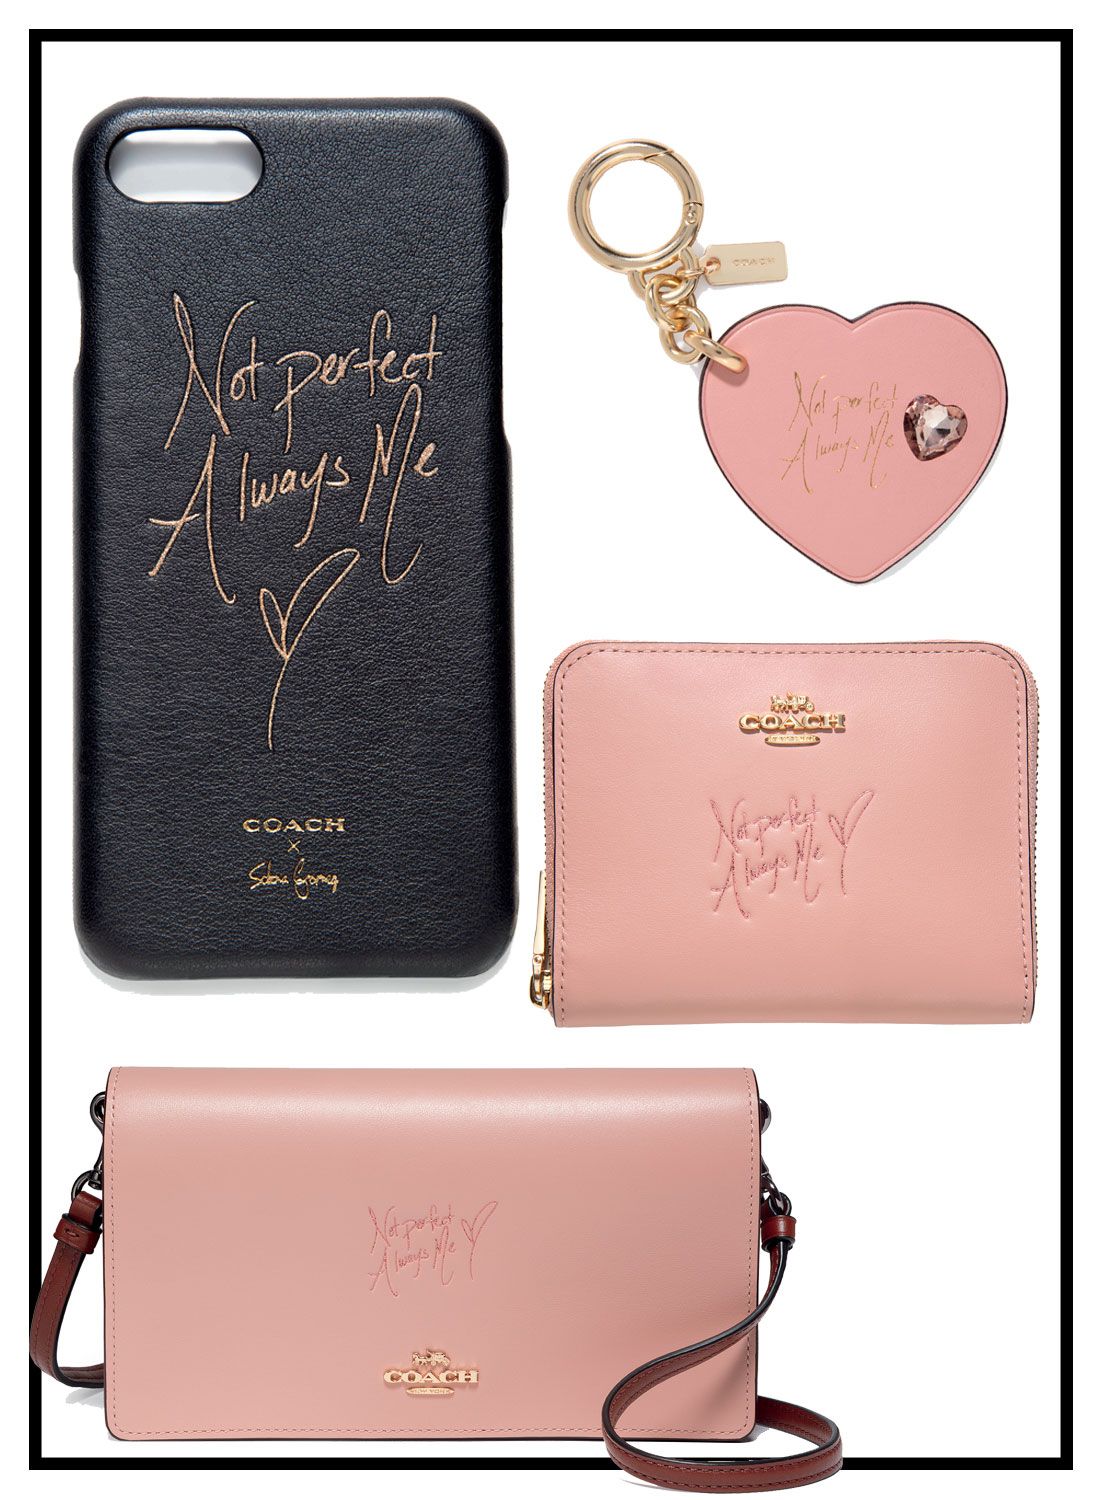 Selena Gomezs Coach Collection Is Here and Comes With Some Inspirational  Messages